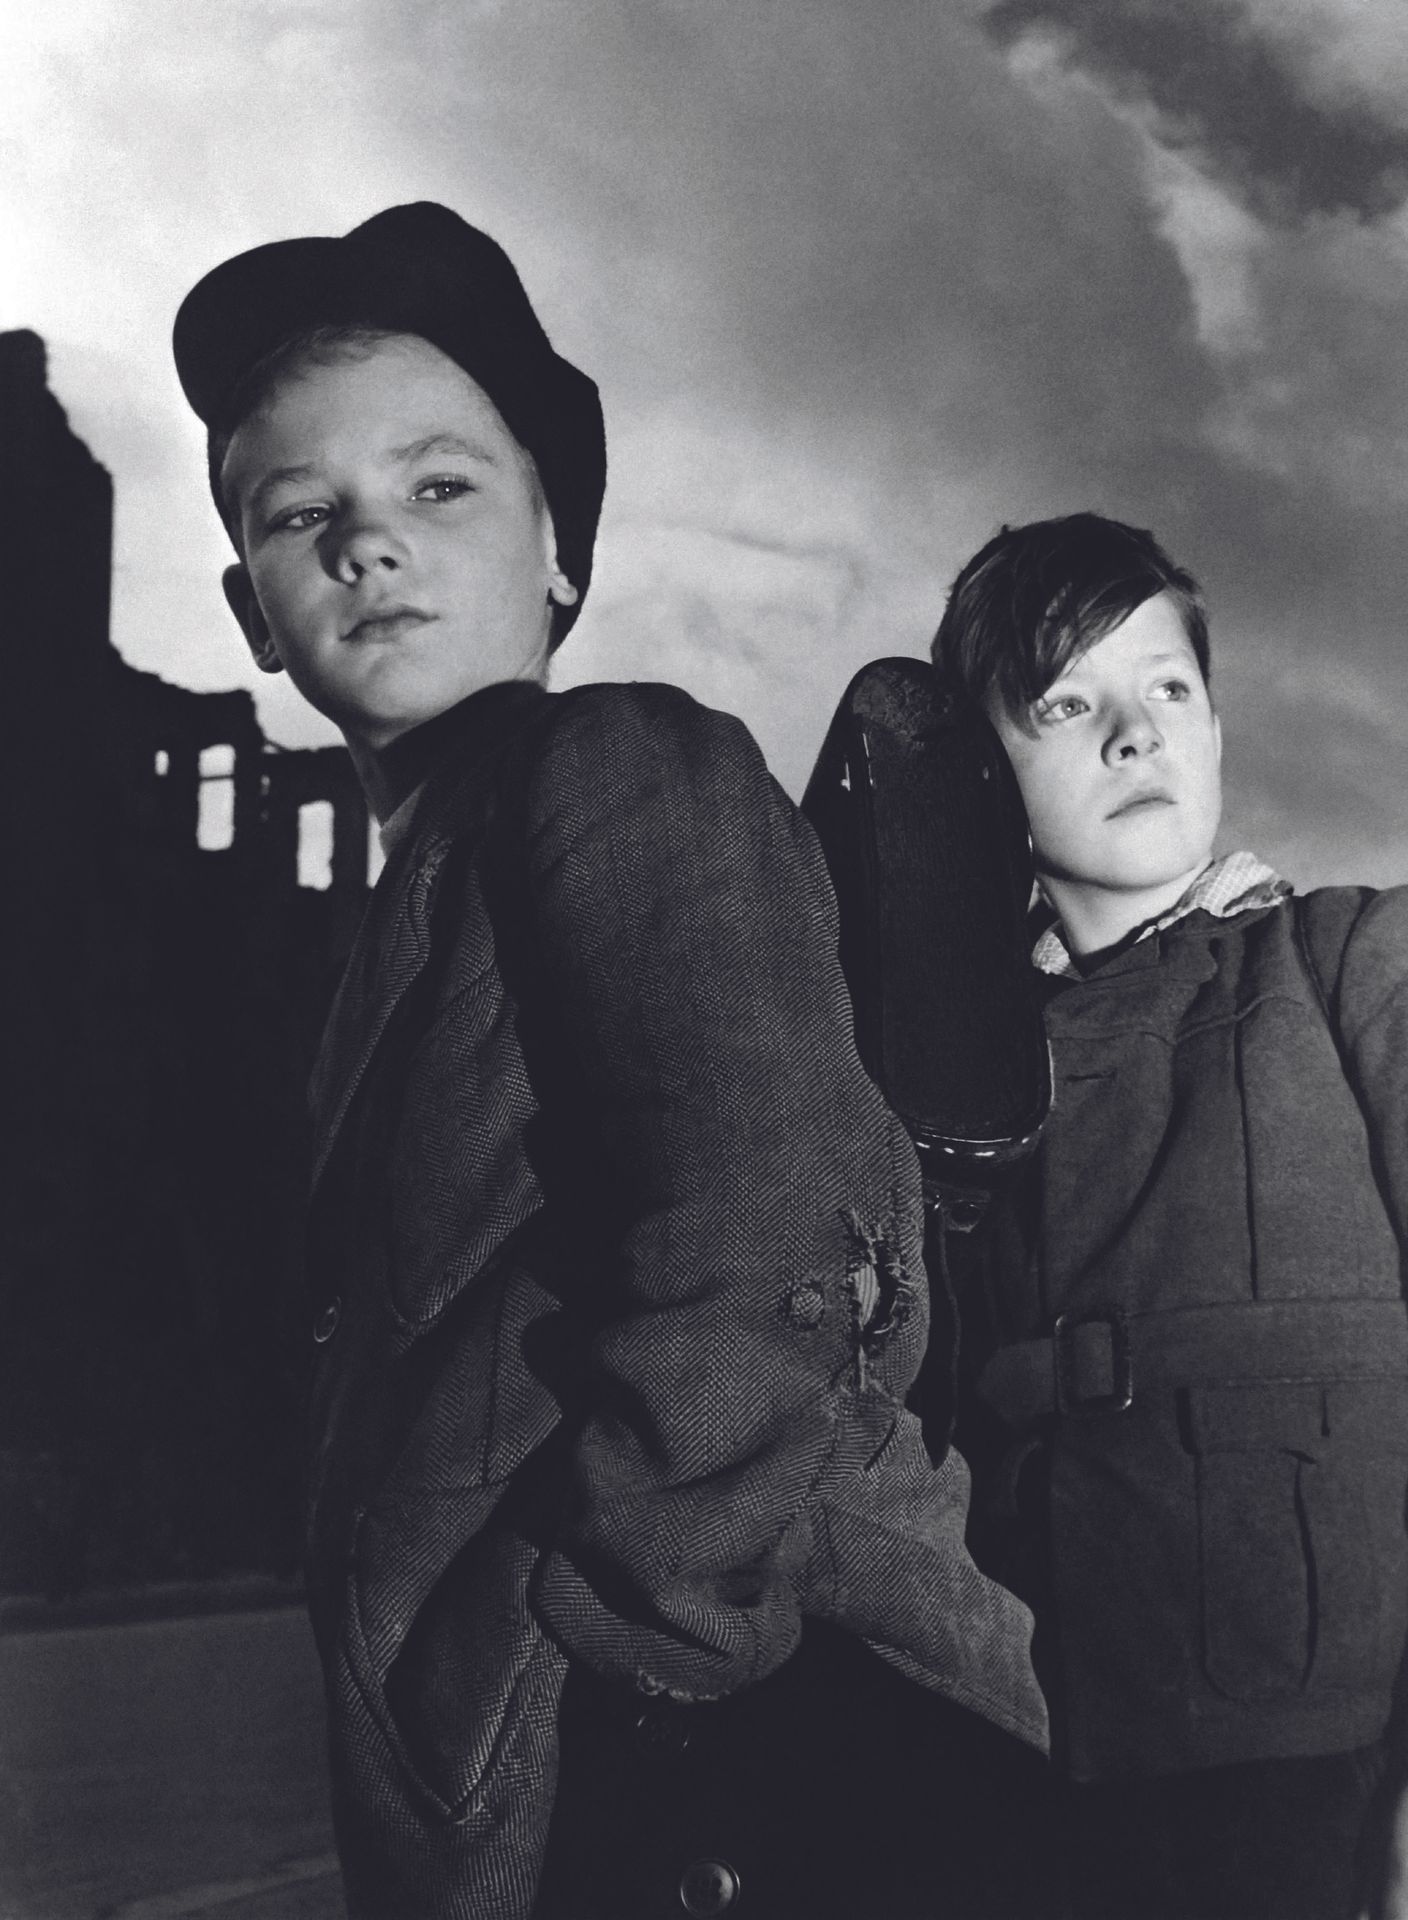 AFP - Jean MANZON AFP - Jean MANZON

Two young Berliner boys in the ruins of the&hellip;